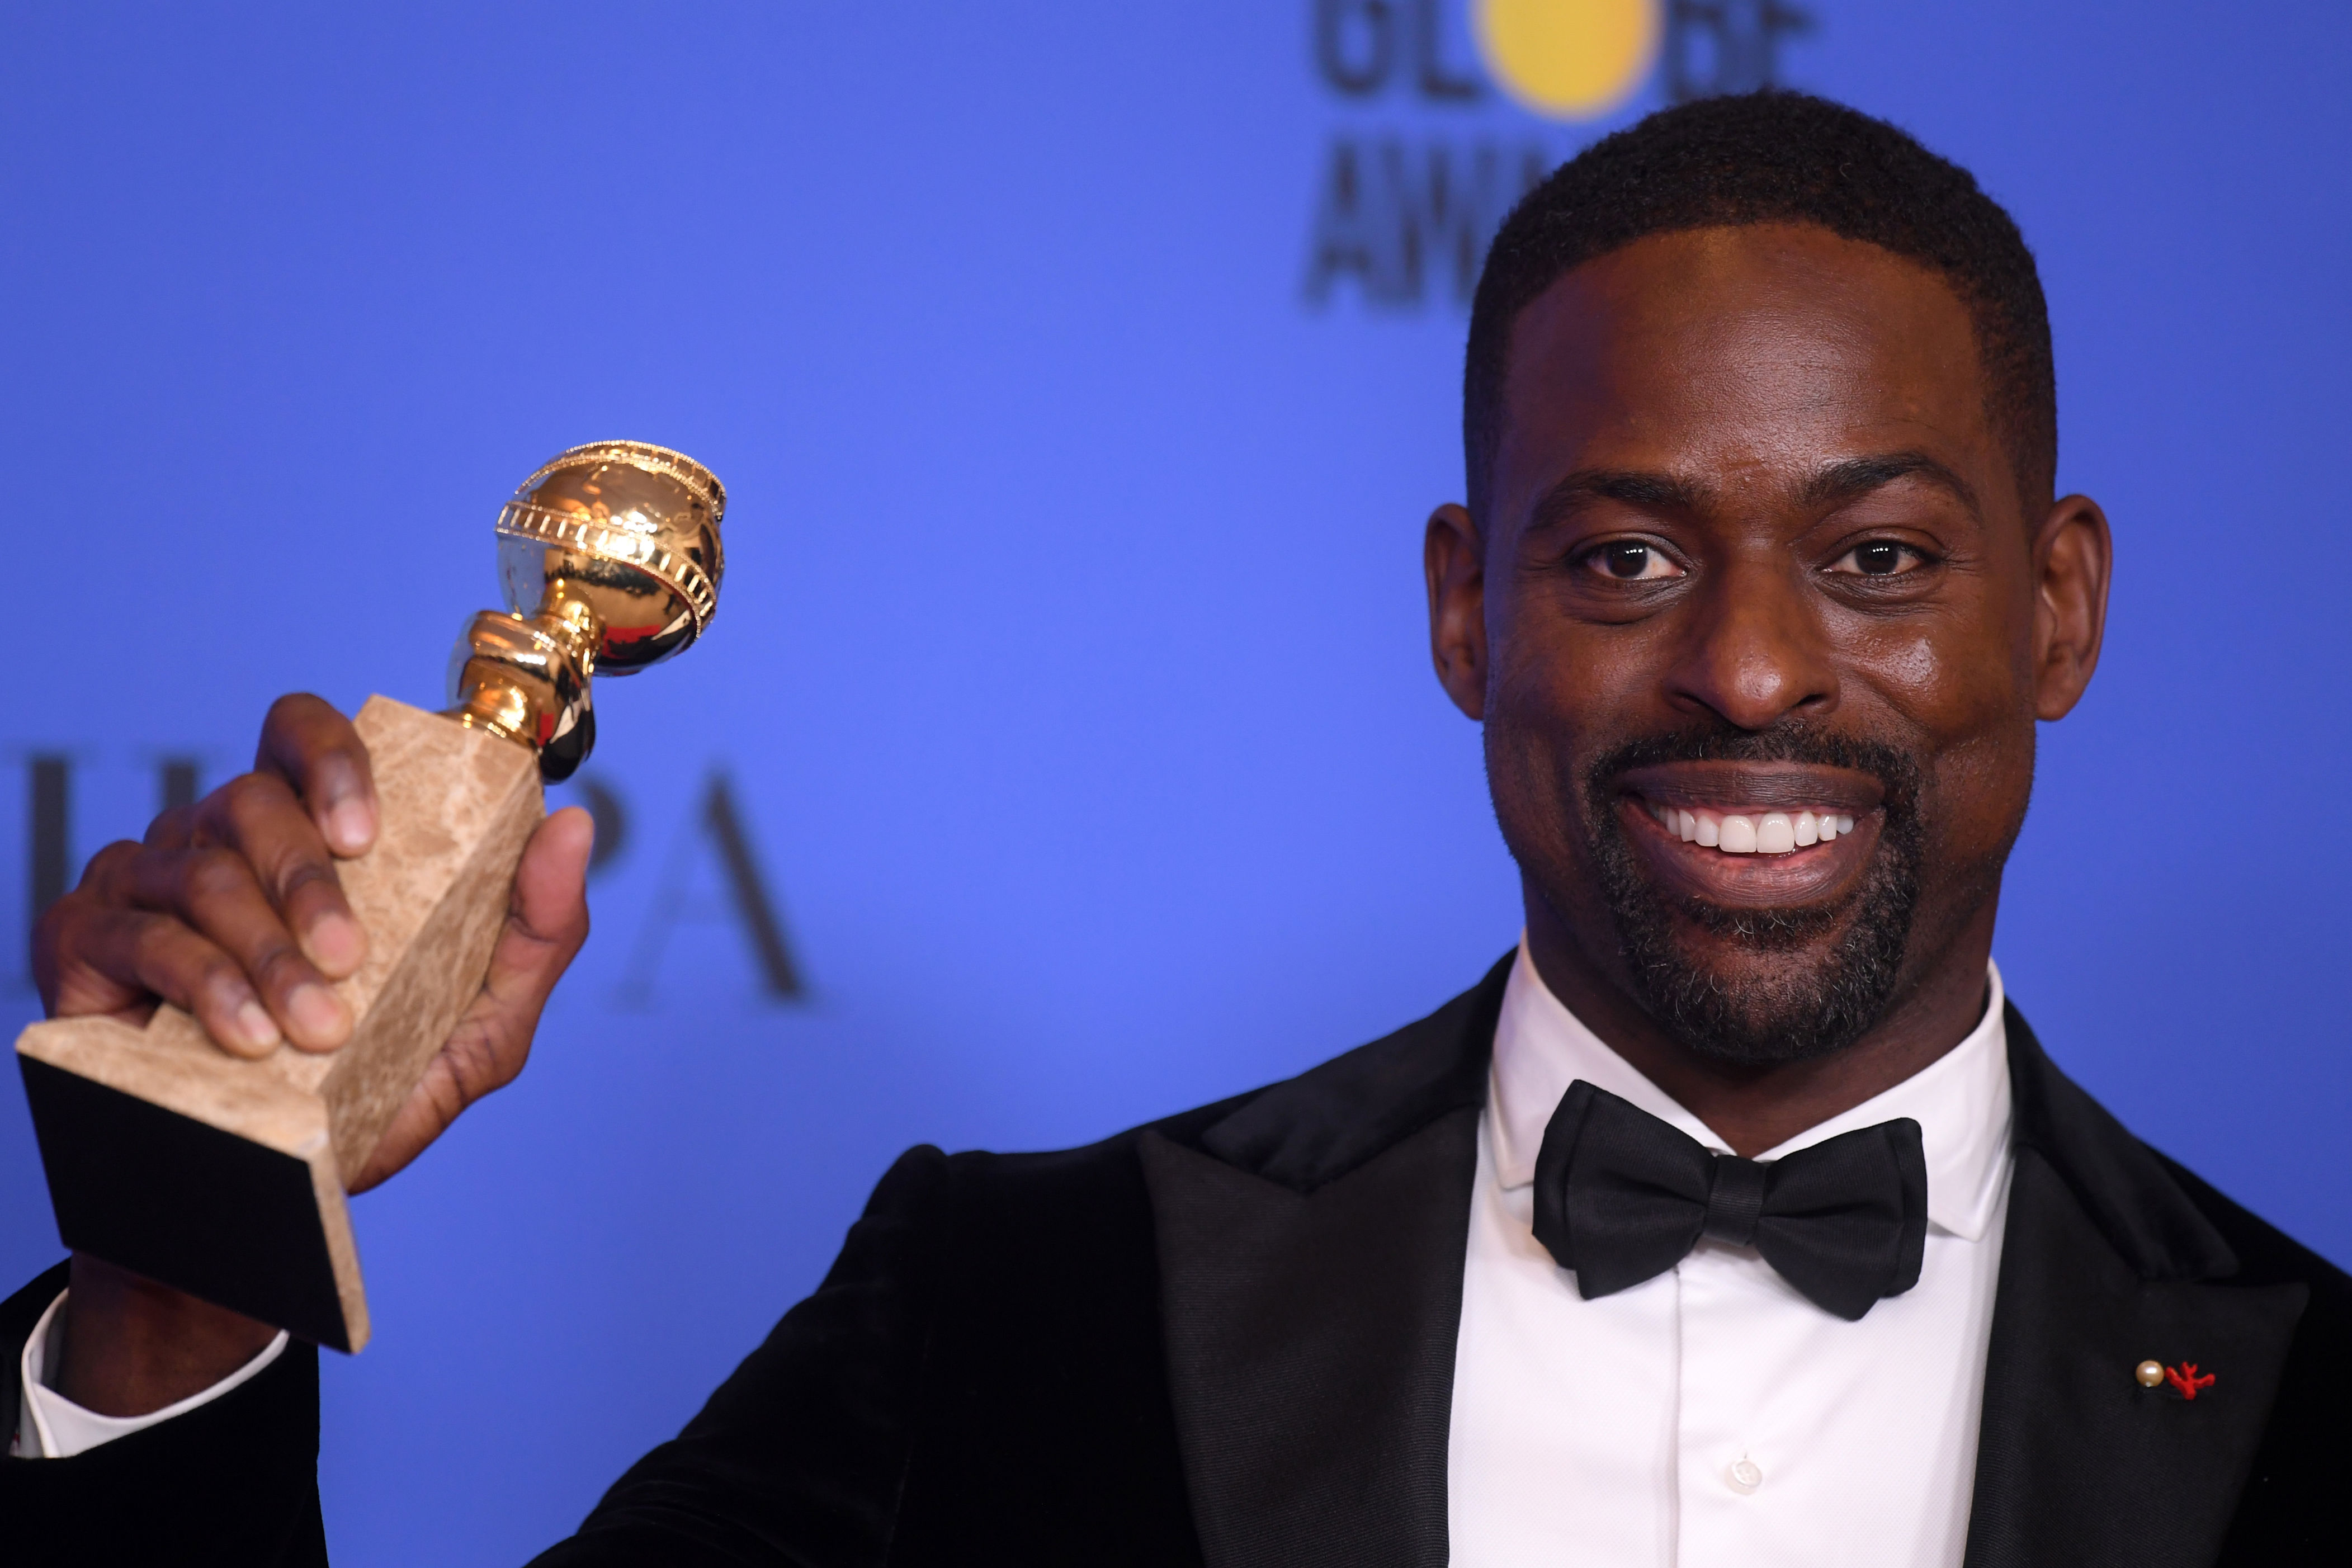 <p>Sterling K. Brown made history during the <a href="https://www.wonderwall.com/awards-events/red-carpet/2018-golden-globes-red-carpet-3011784.gallery">2018 Golden Globes</a> when he became the first Black man to win the award for best performance by a male actor on a TV drama for his work on "This Is Us." Two weeks later, during the <a href="https://www.wonderwall.com/awards-events/red-carpet/2018-sag-awards-see-all-stars-who-attended-show-3012108.gallery">2018 SAG Awards</a>, he made history for the second time when he became the first Black man to win the award for outstanding performance by a male actor on a drama series.</p>